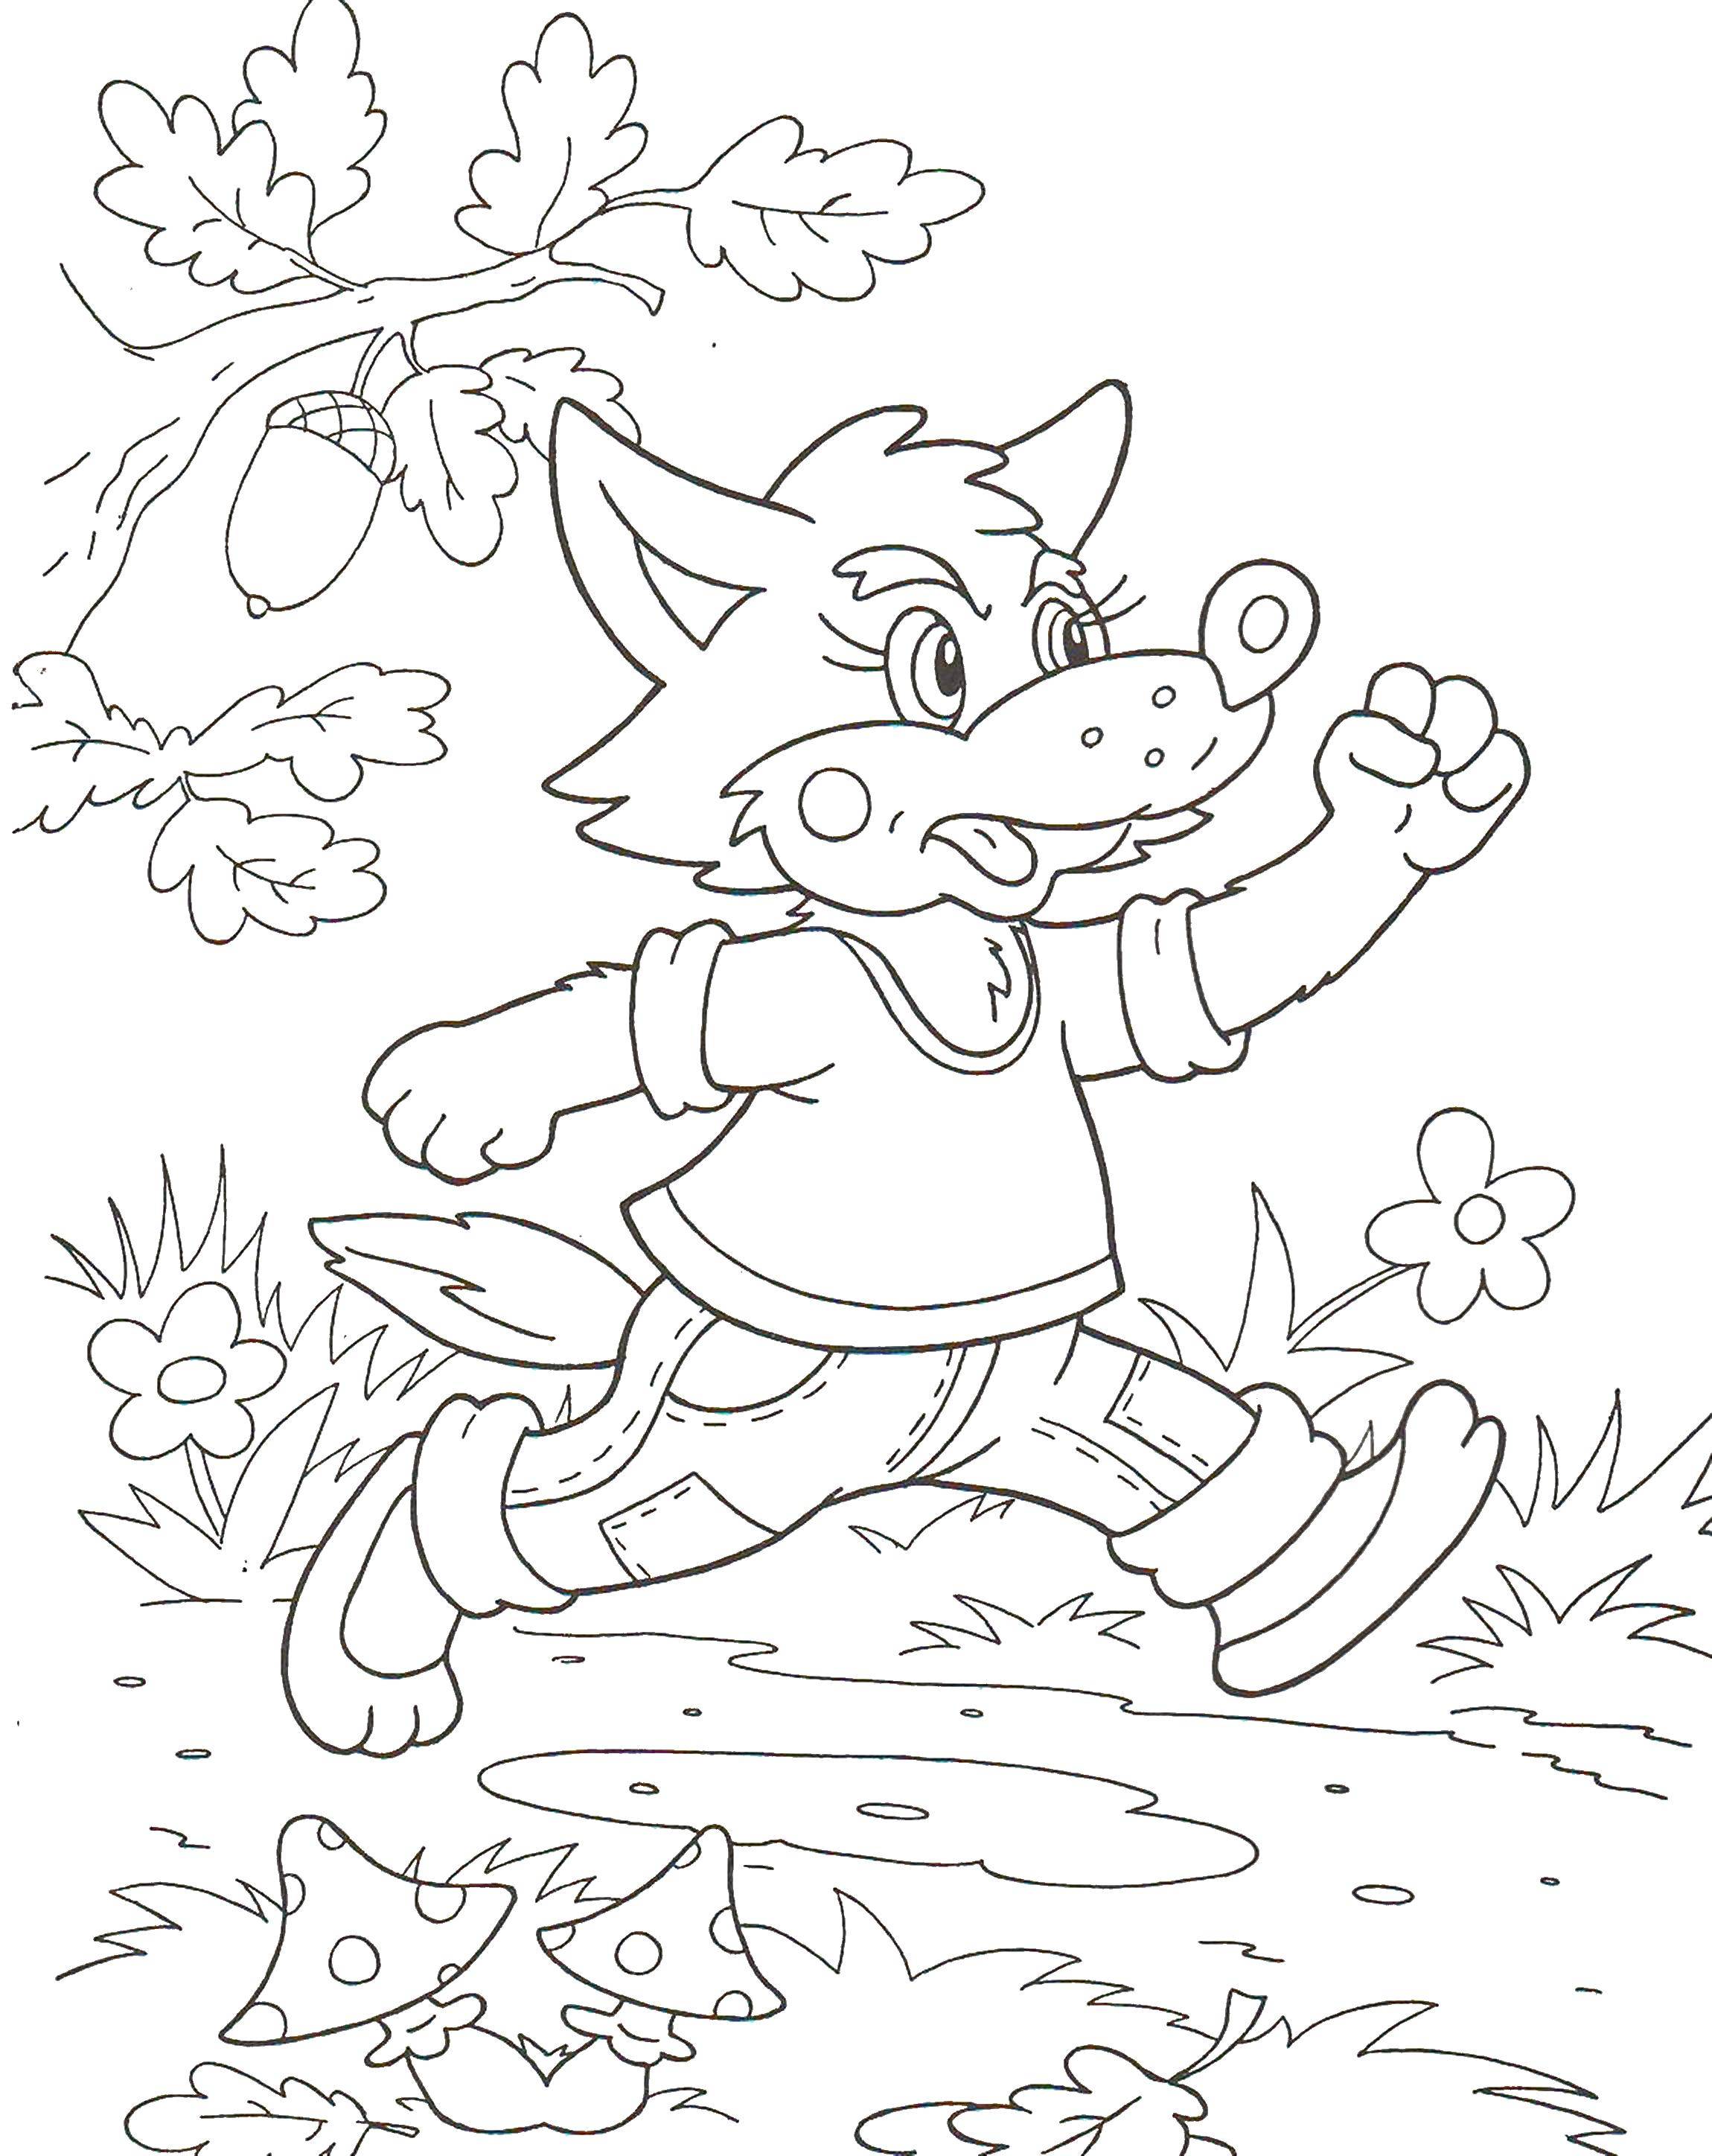 Coloring The wolf runs. Category baby. Tags:  pig, wolf.